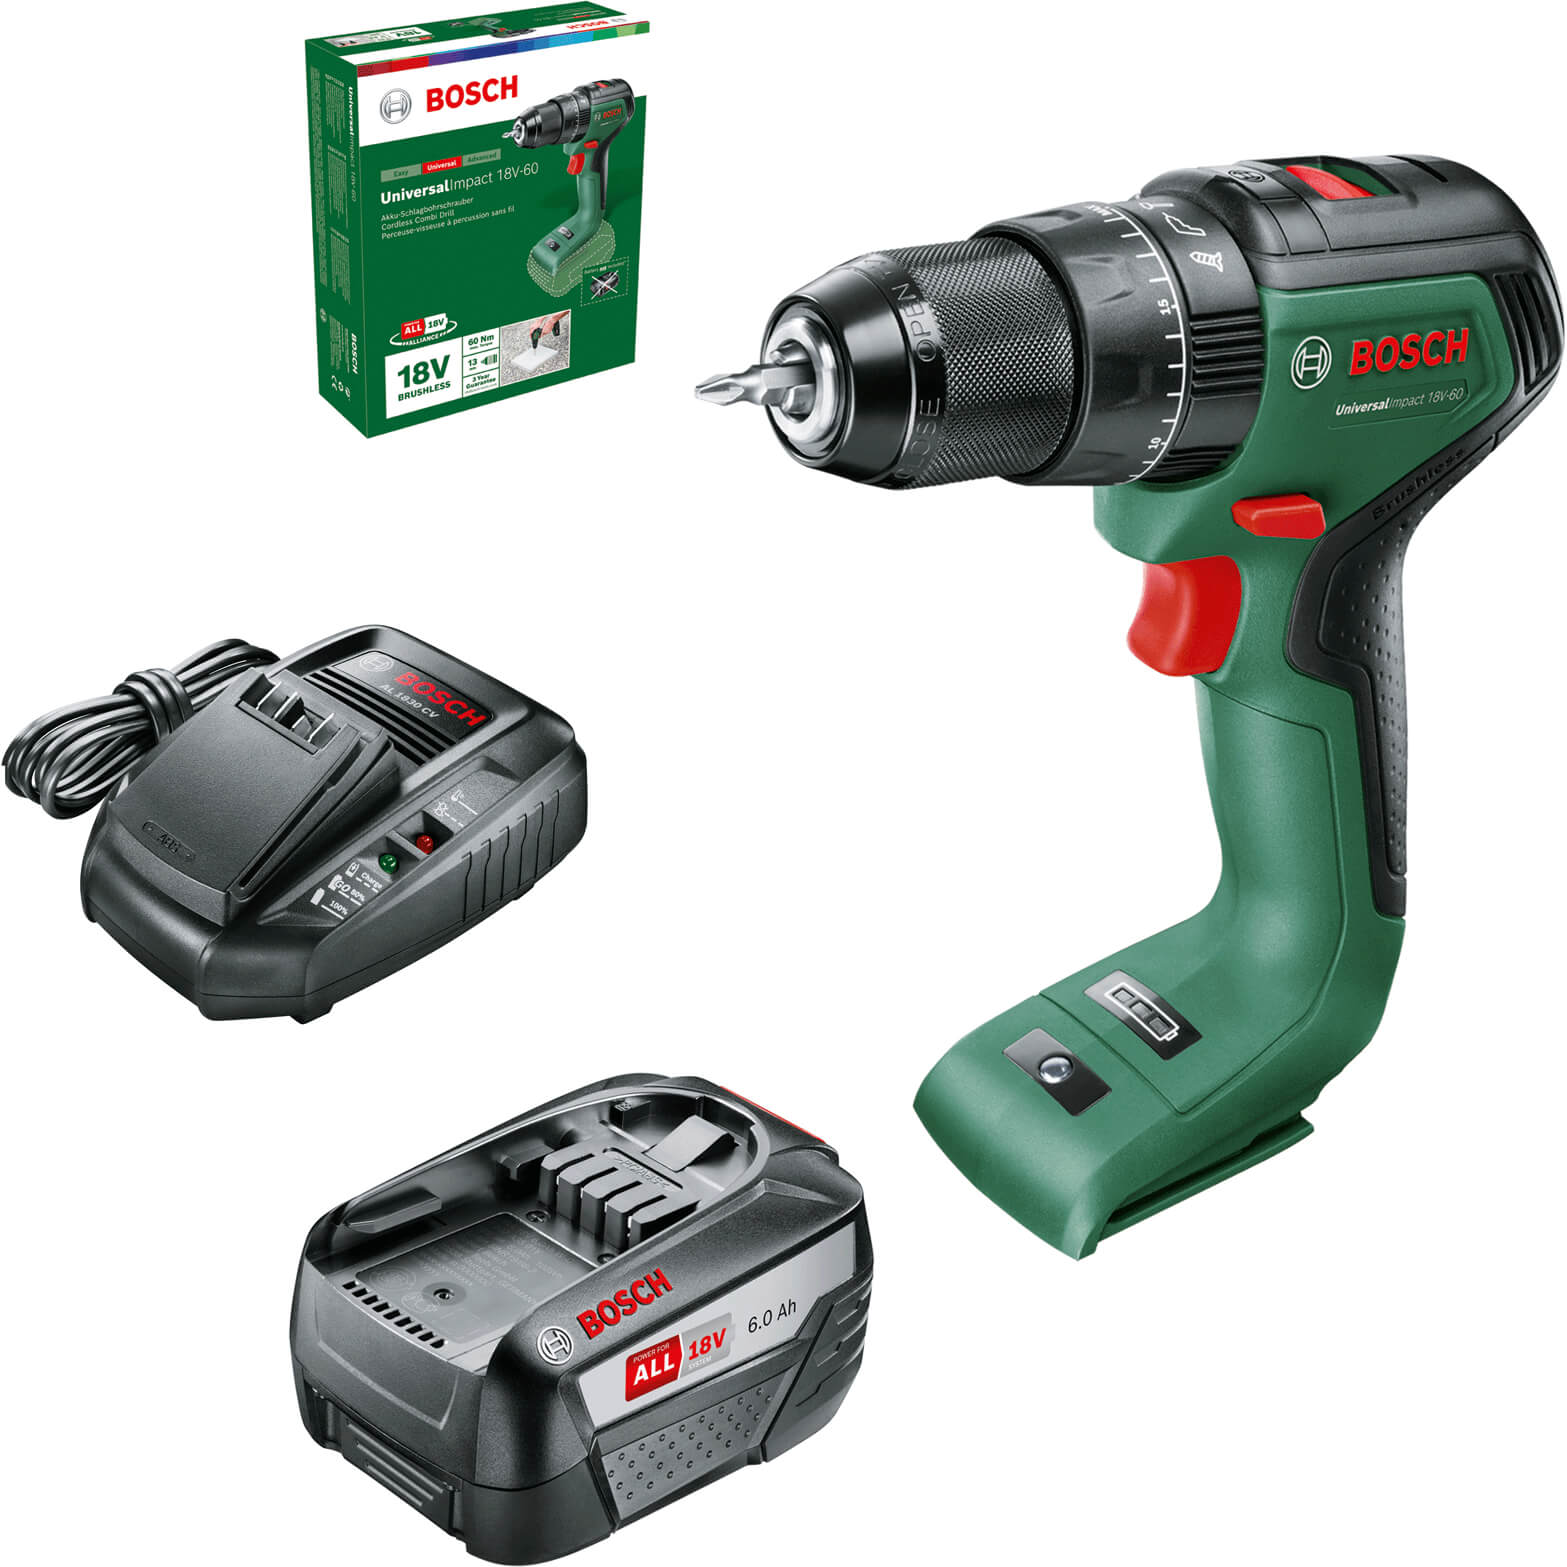 Image of Bosch UNIVERSALIMPACT 18V-60 18v Cordless Brushless Combi Drill 1 x 6ah Li-ion Charger No Case